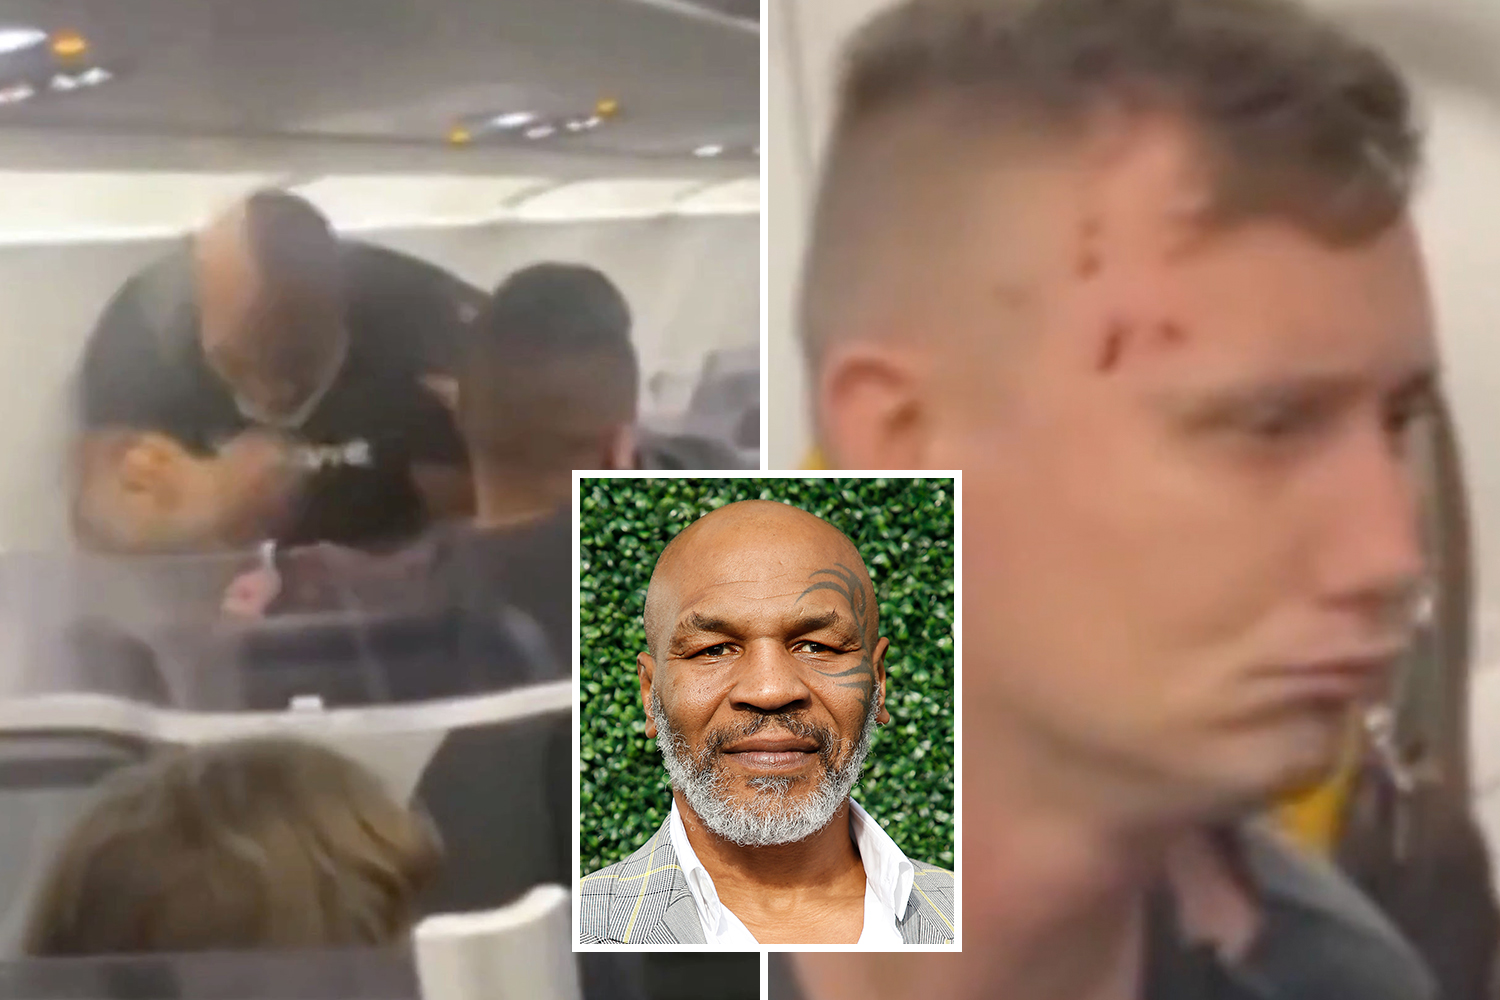 Mike Tyson 'had bottle of water thrown at him' before punching plane passenger